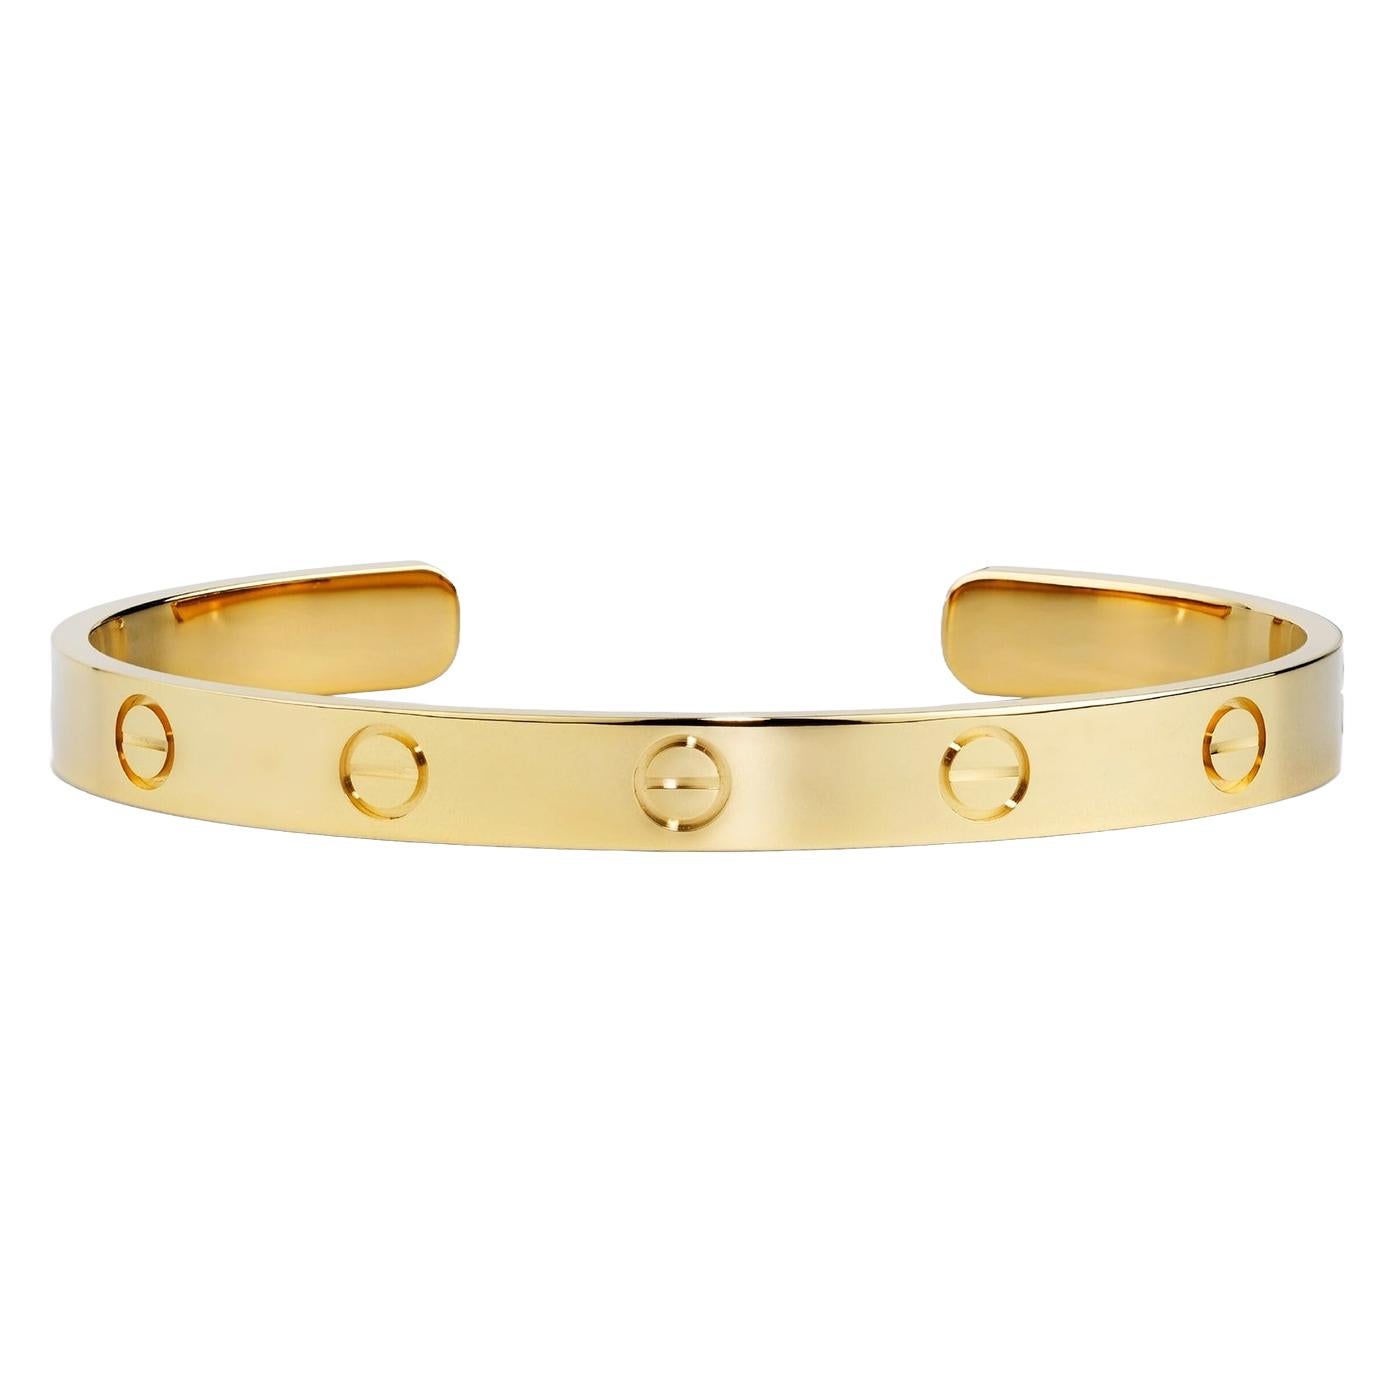 Cartier LOVE bracelet, 18K yellow gold (750/1000). Width: 6.2 mm (for size 20).

Details:
Brand: Cartier
Type: Love Bracelet
Material: 18K Yellow Gold
Size: 20
Theme: Romantic, Love
Purchased Date: 2021
Scope of Delivery: Original Box and Original